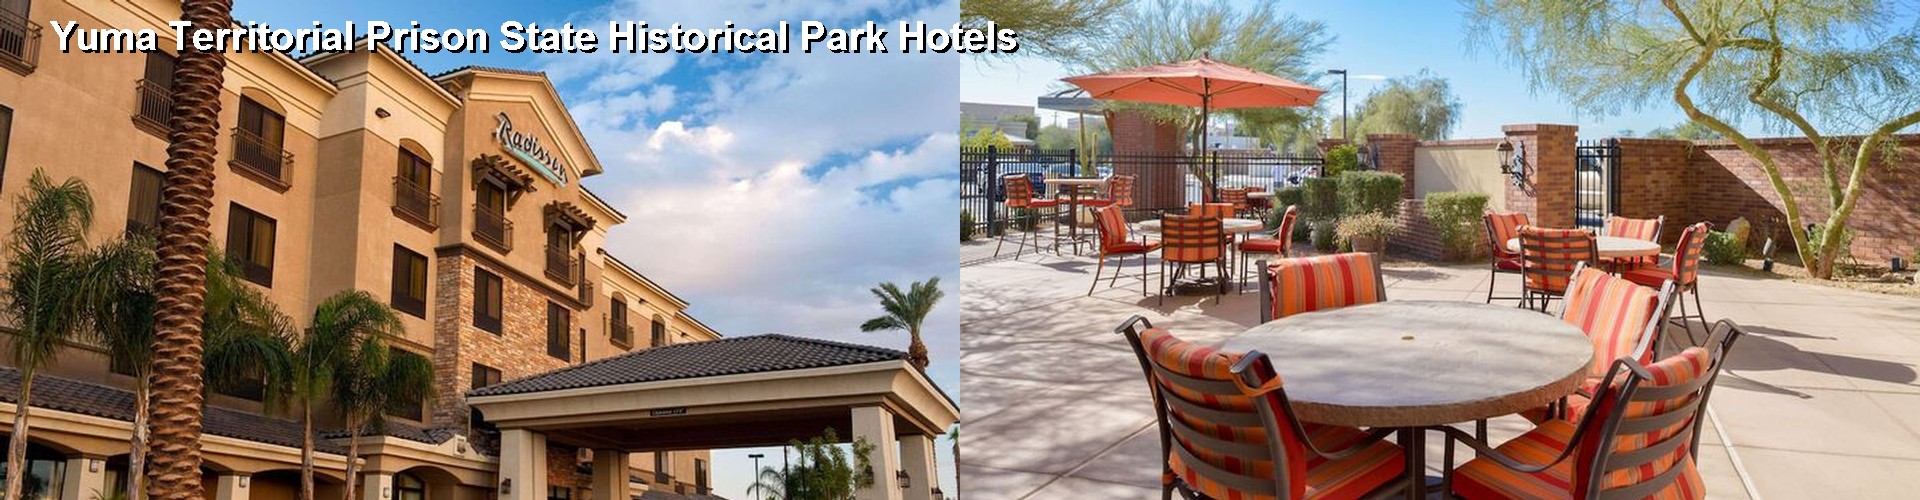 4 Best Hotels near Yuma Territorial Prison State Historical Park